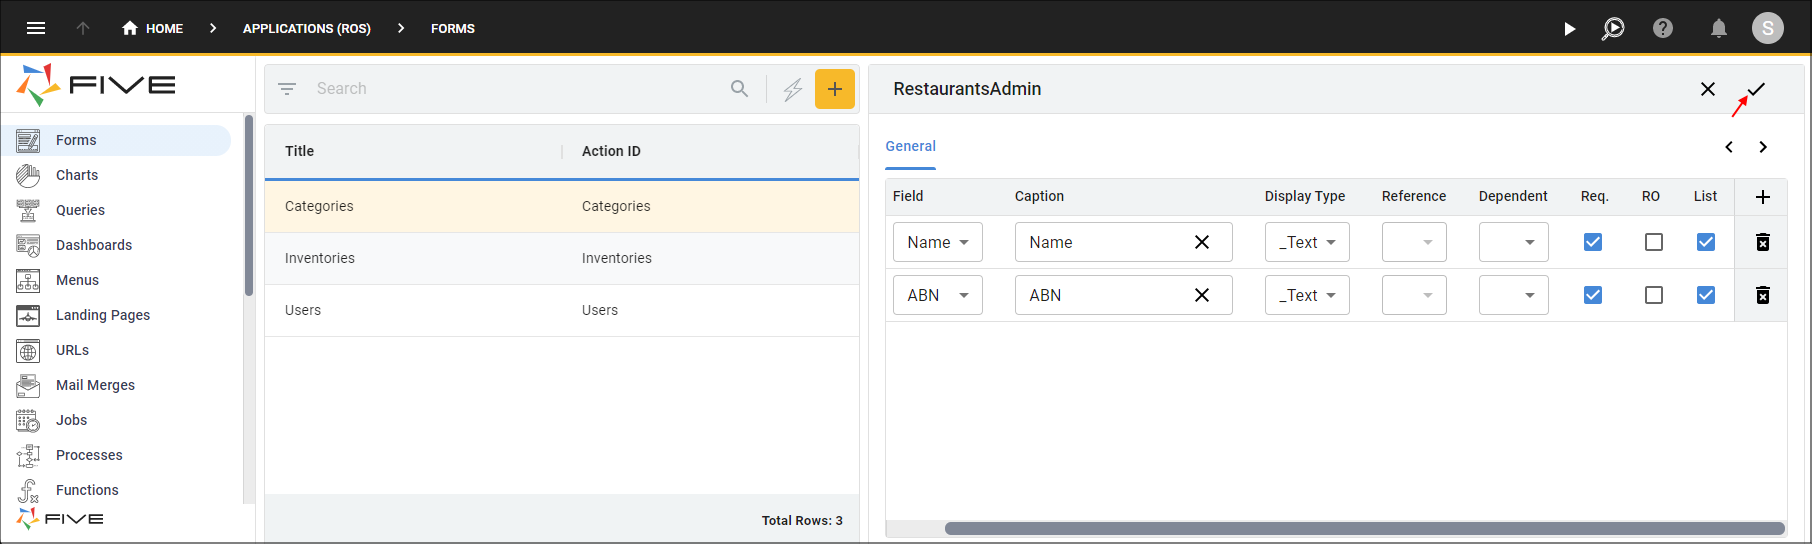 Configure the Fields and Save the Restaurants Form